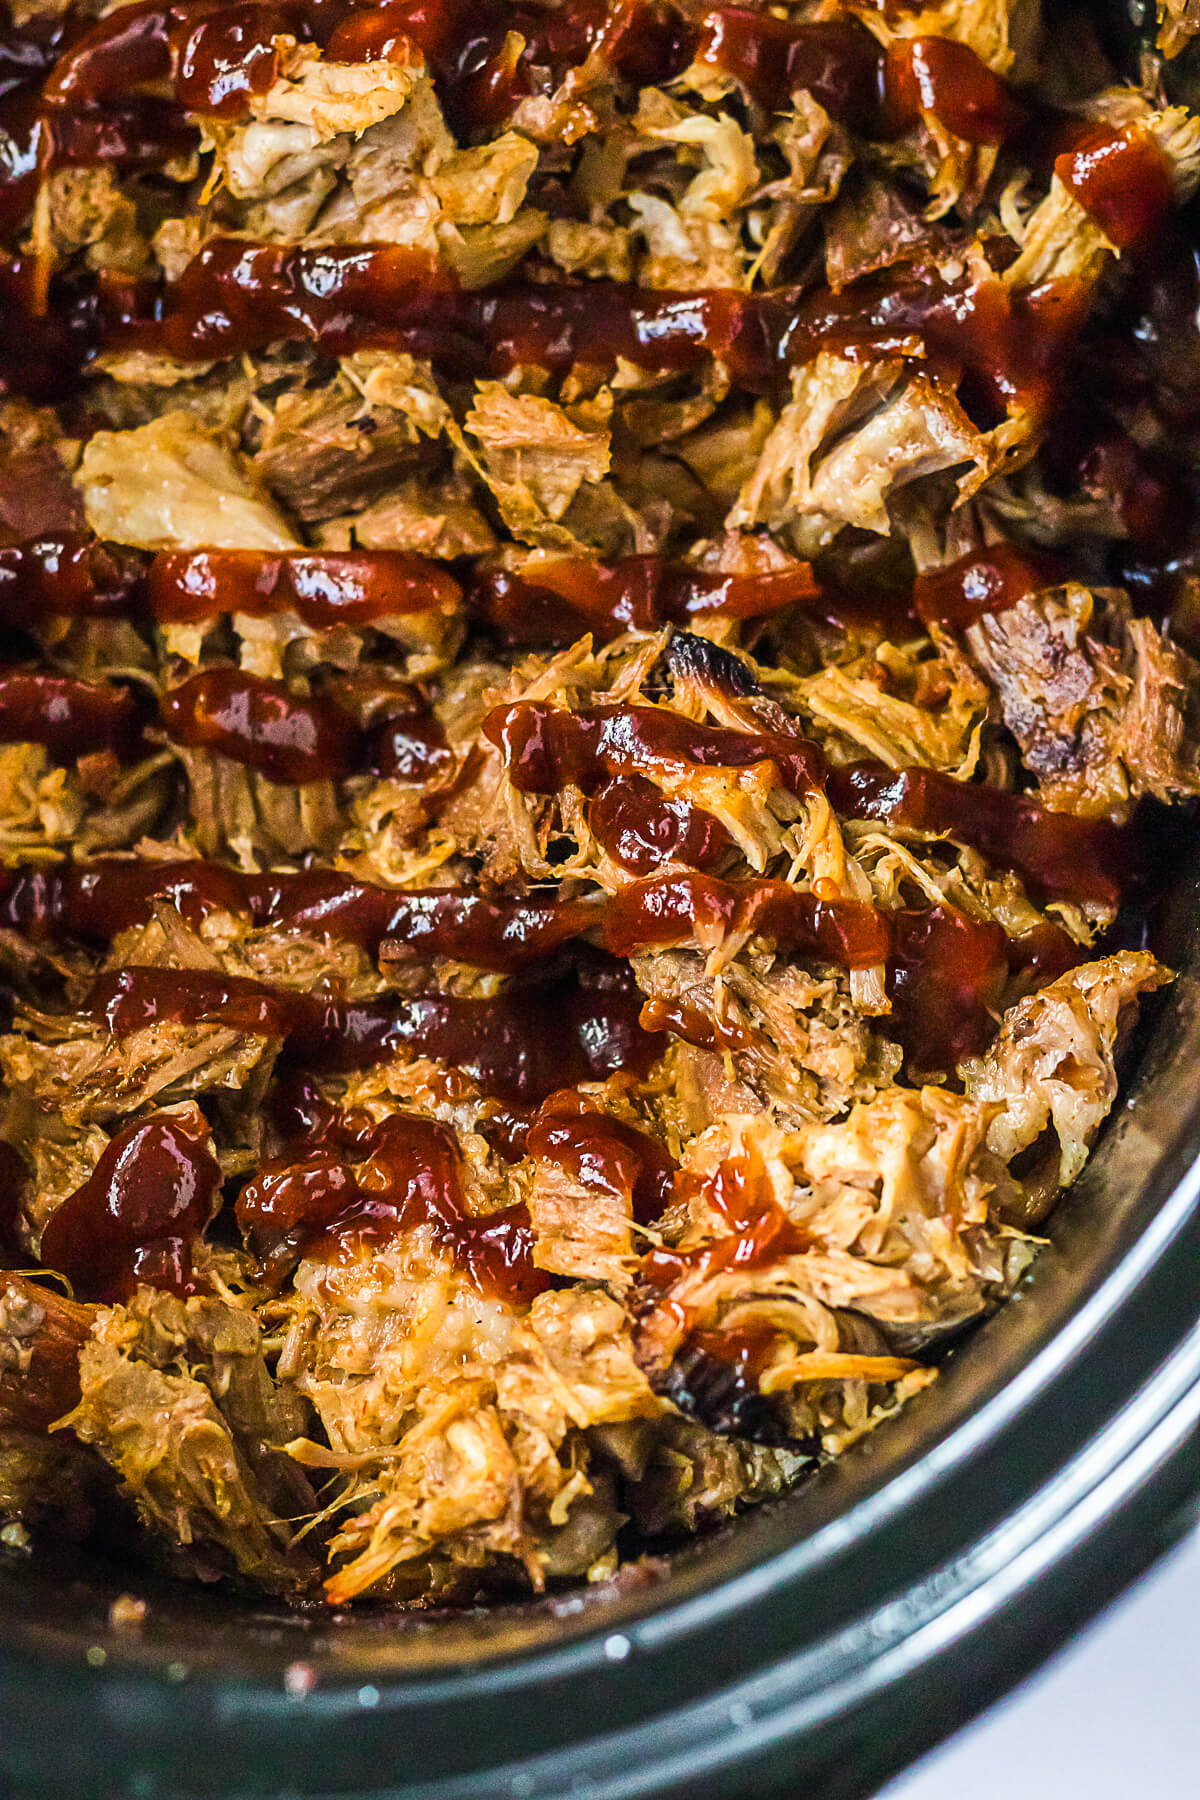 A slow cooker filled with Root beer pulled pork drizzled with barbecue sauce.